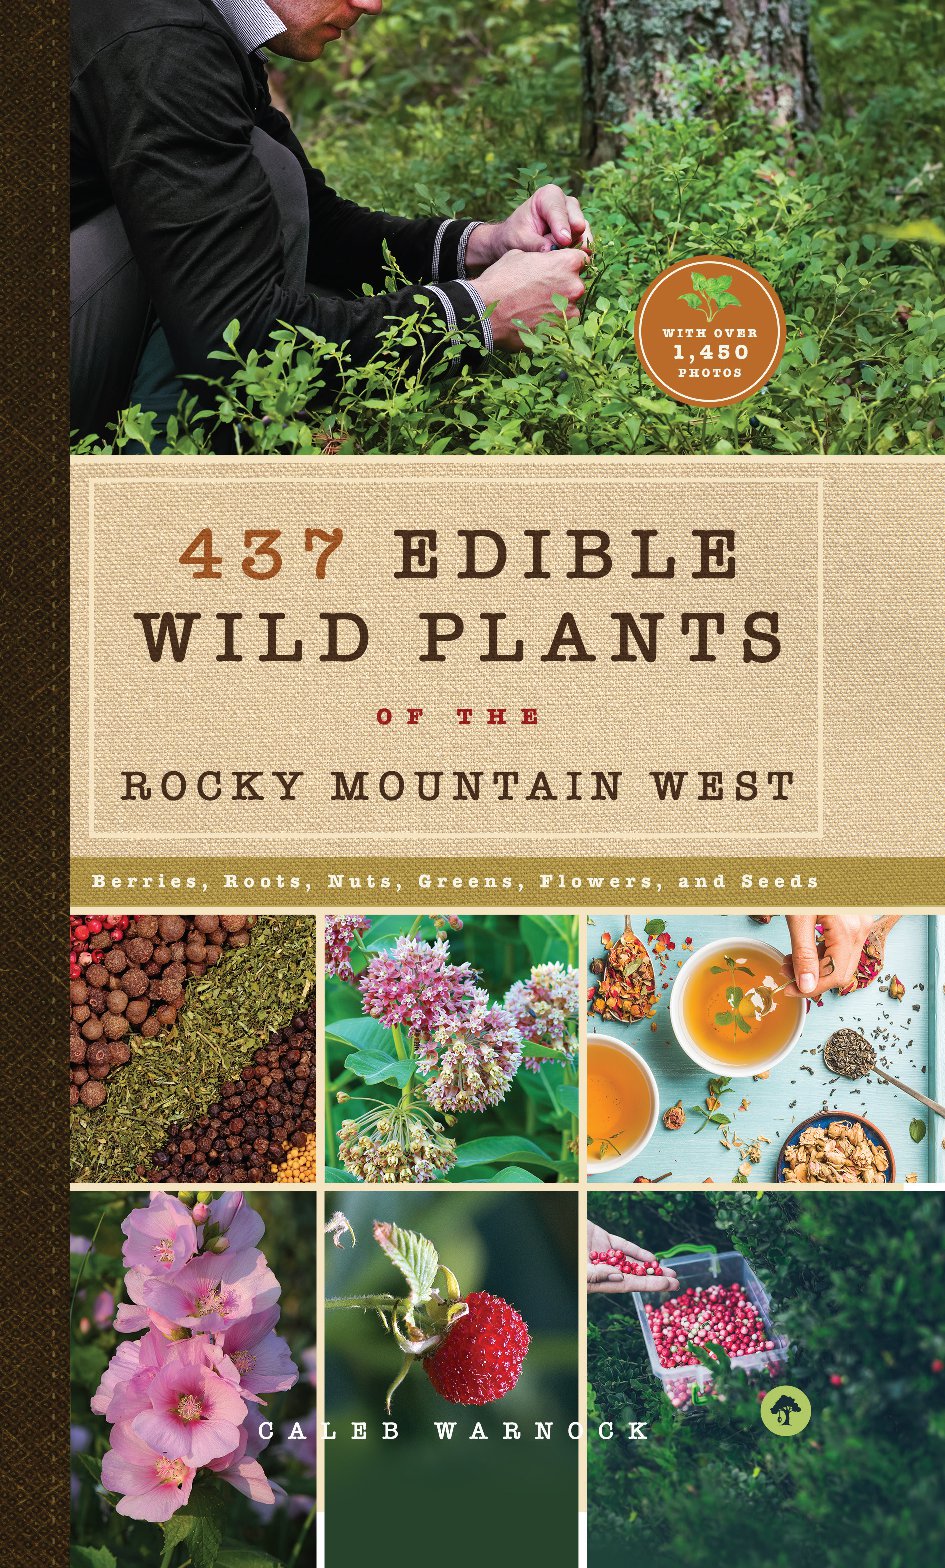 437 Edible Wild Plants of the Rocky Mountain West